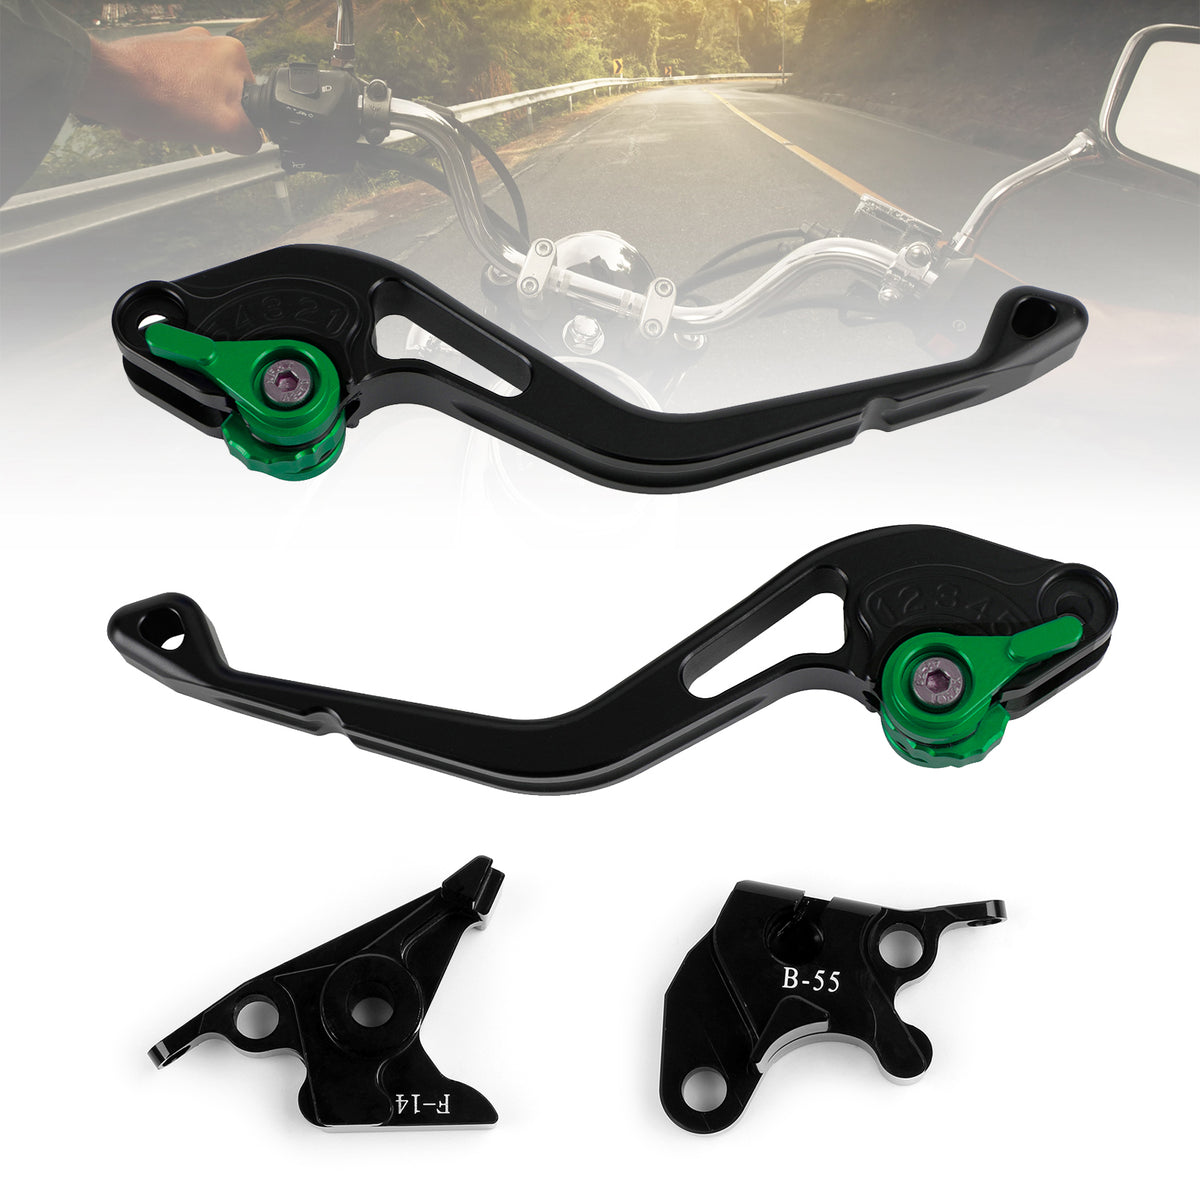 NEW Short Clutch Brake Lever fit for Buell XB12R XB12Ss XB12Scg M2 Cyclone